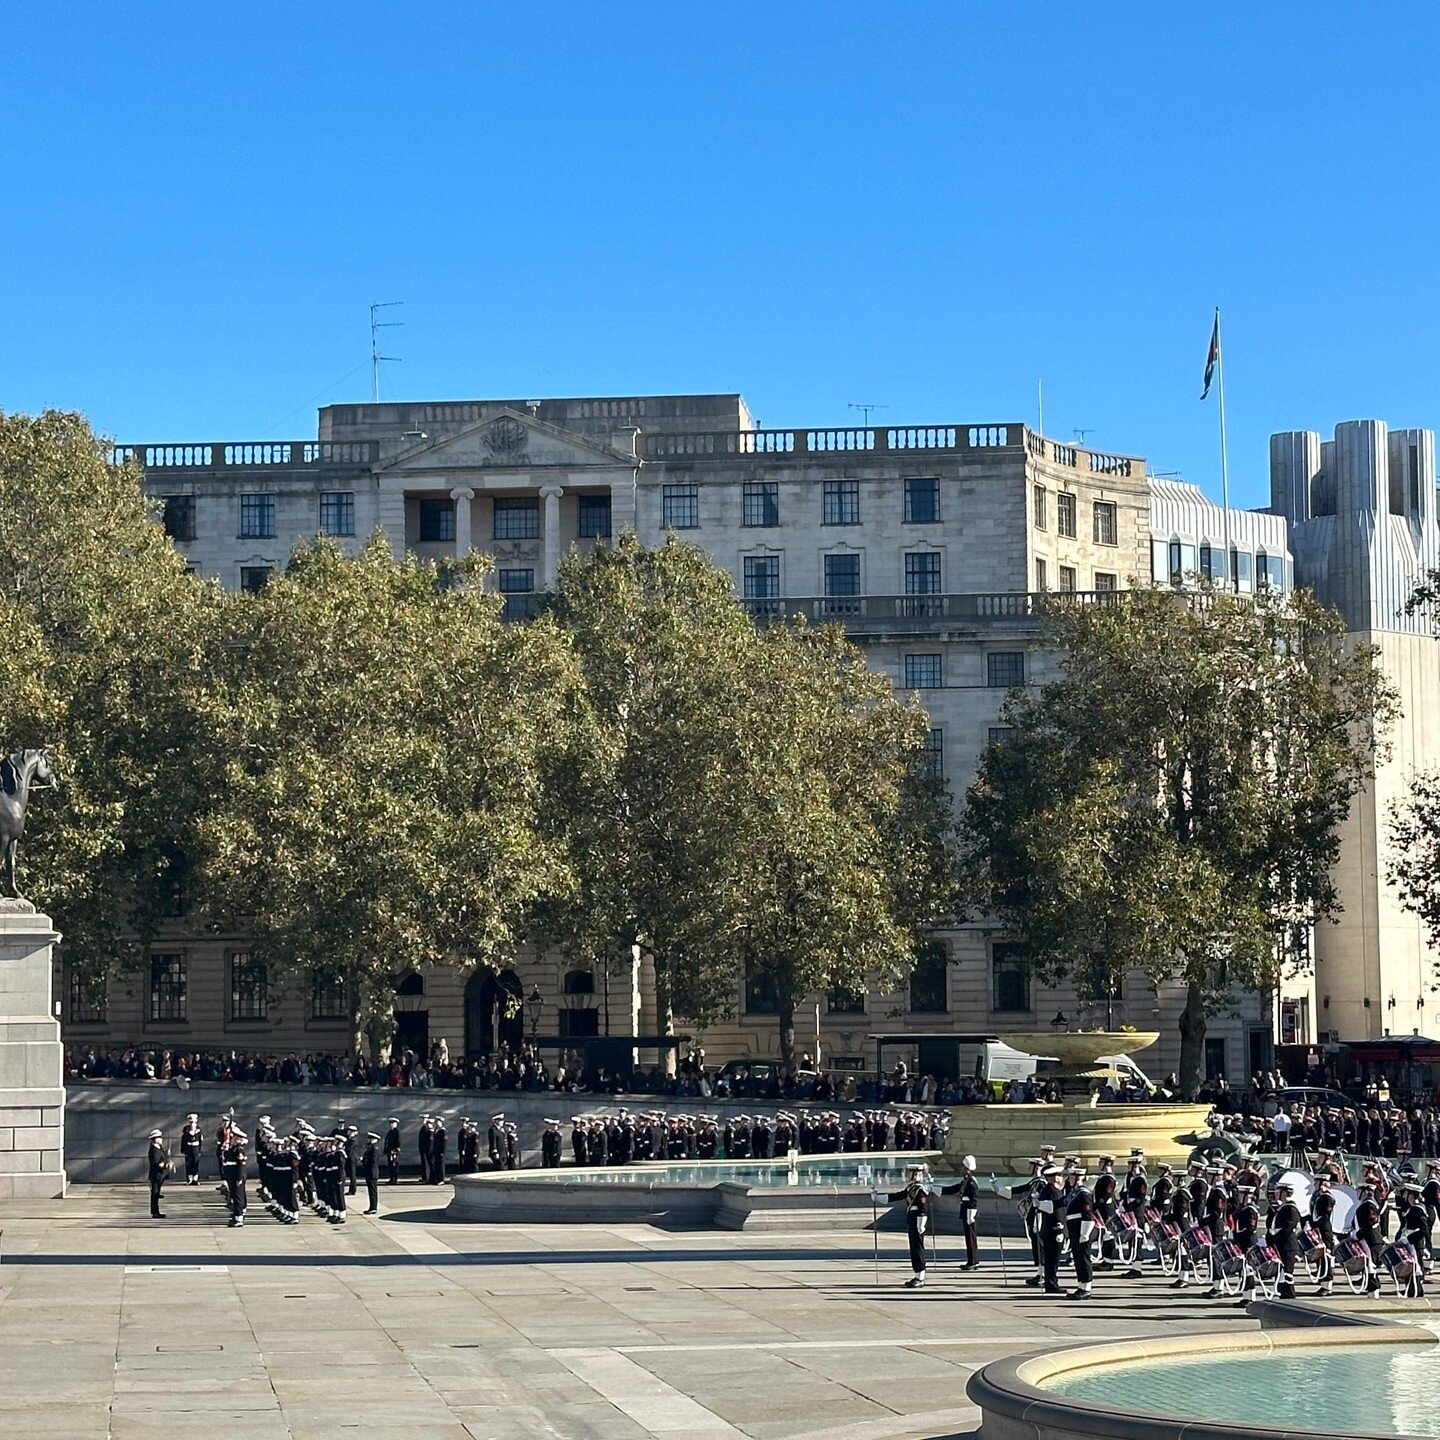 Great to hear that Sixth Form student Ryan was selected to be part of the Trafalgar Day parade representing the Royal Marine Volunteer Corps during half term👏